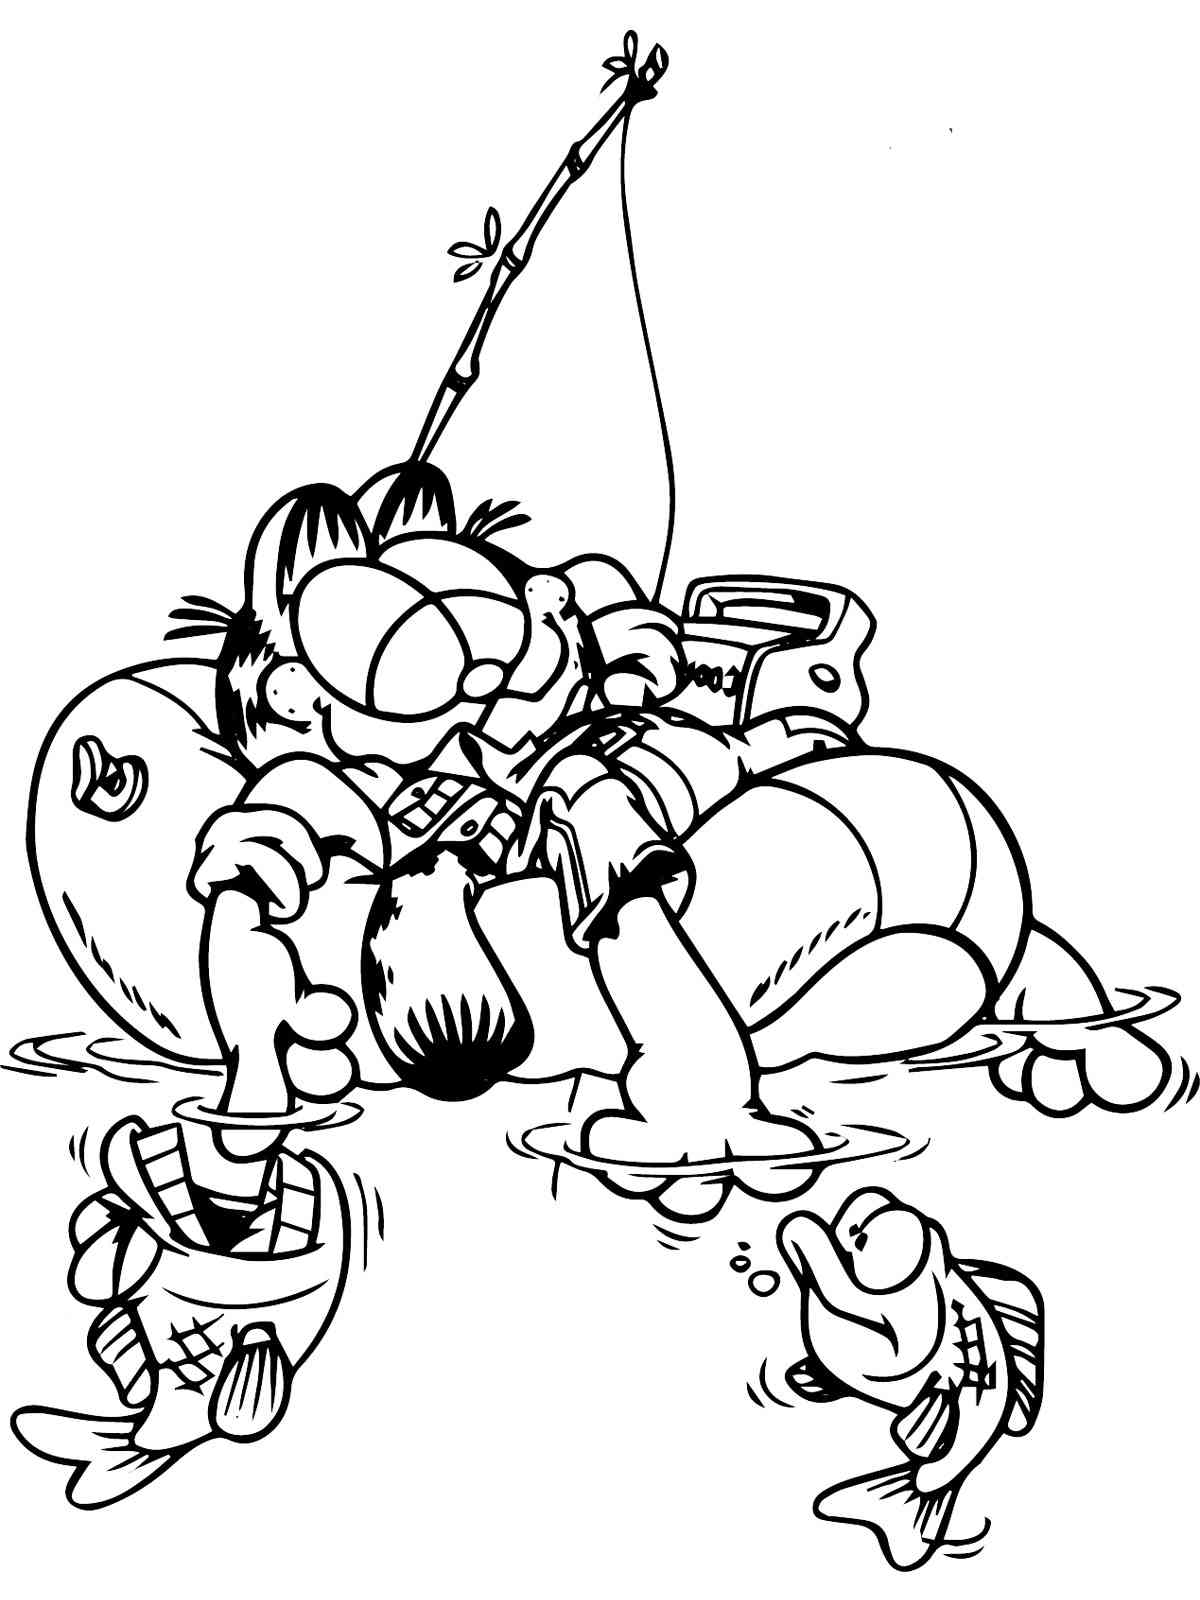 Garfield 7 coloring page